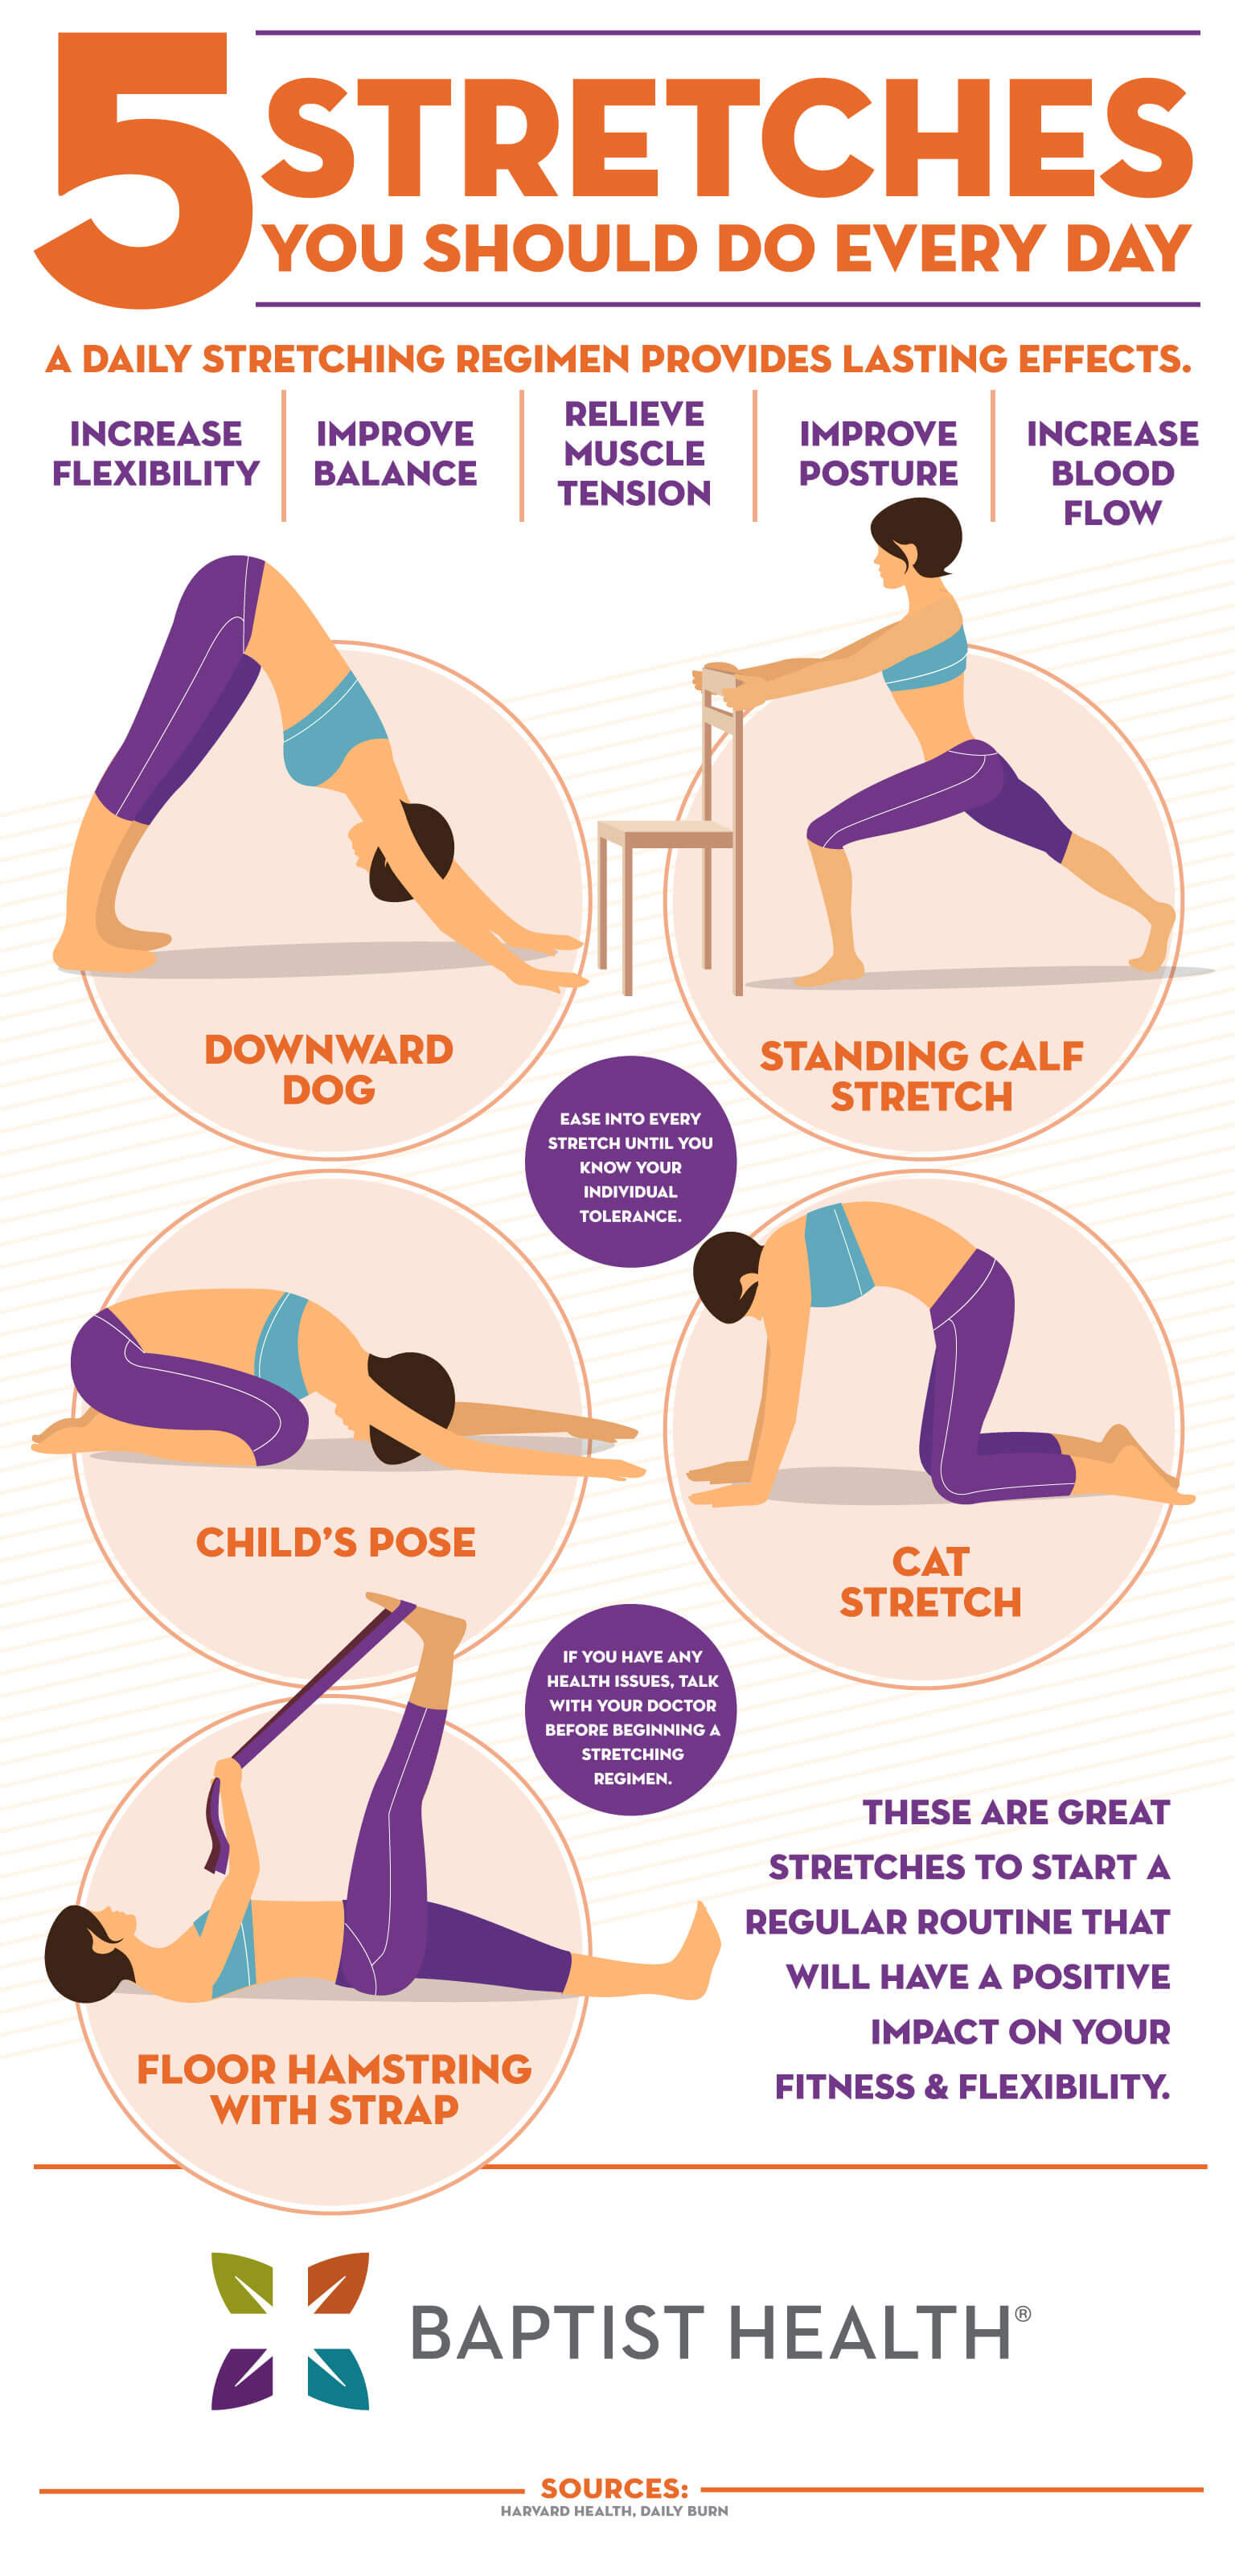 Stretch your way to better flexibility